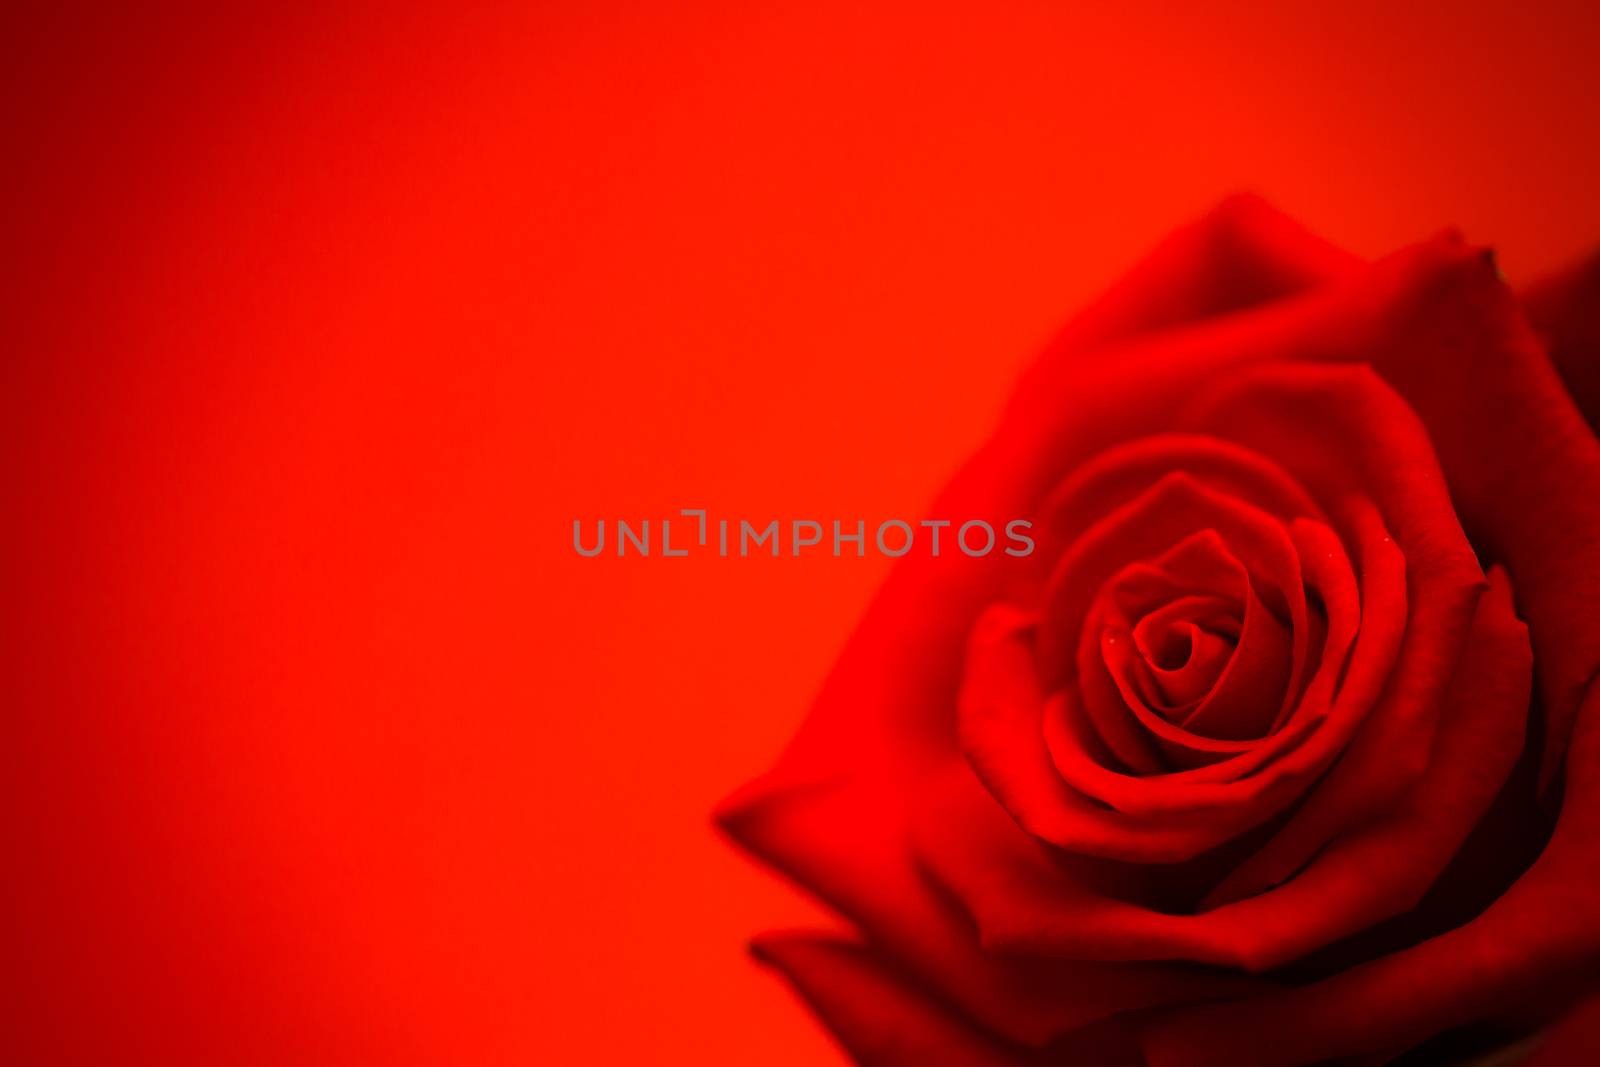 Red rose in bloom on red background